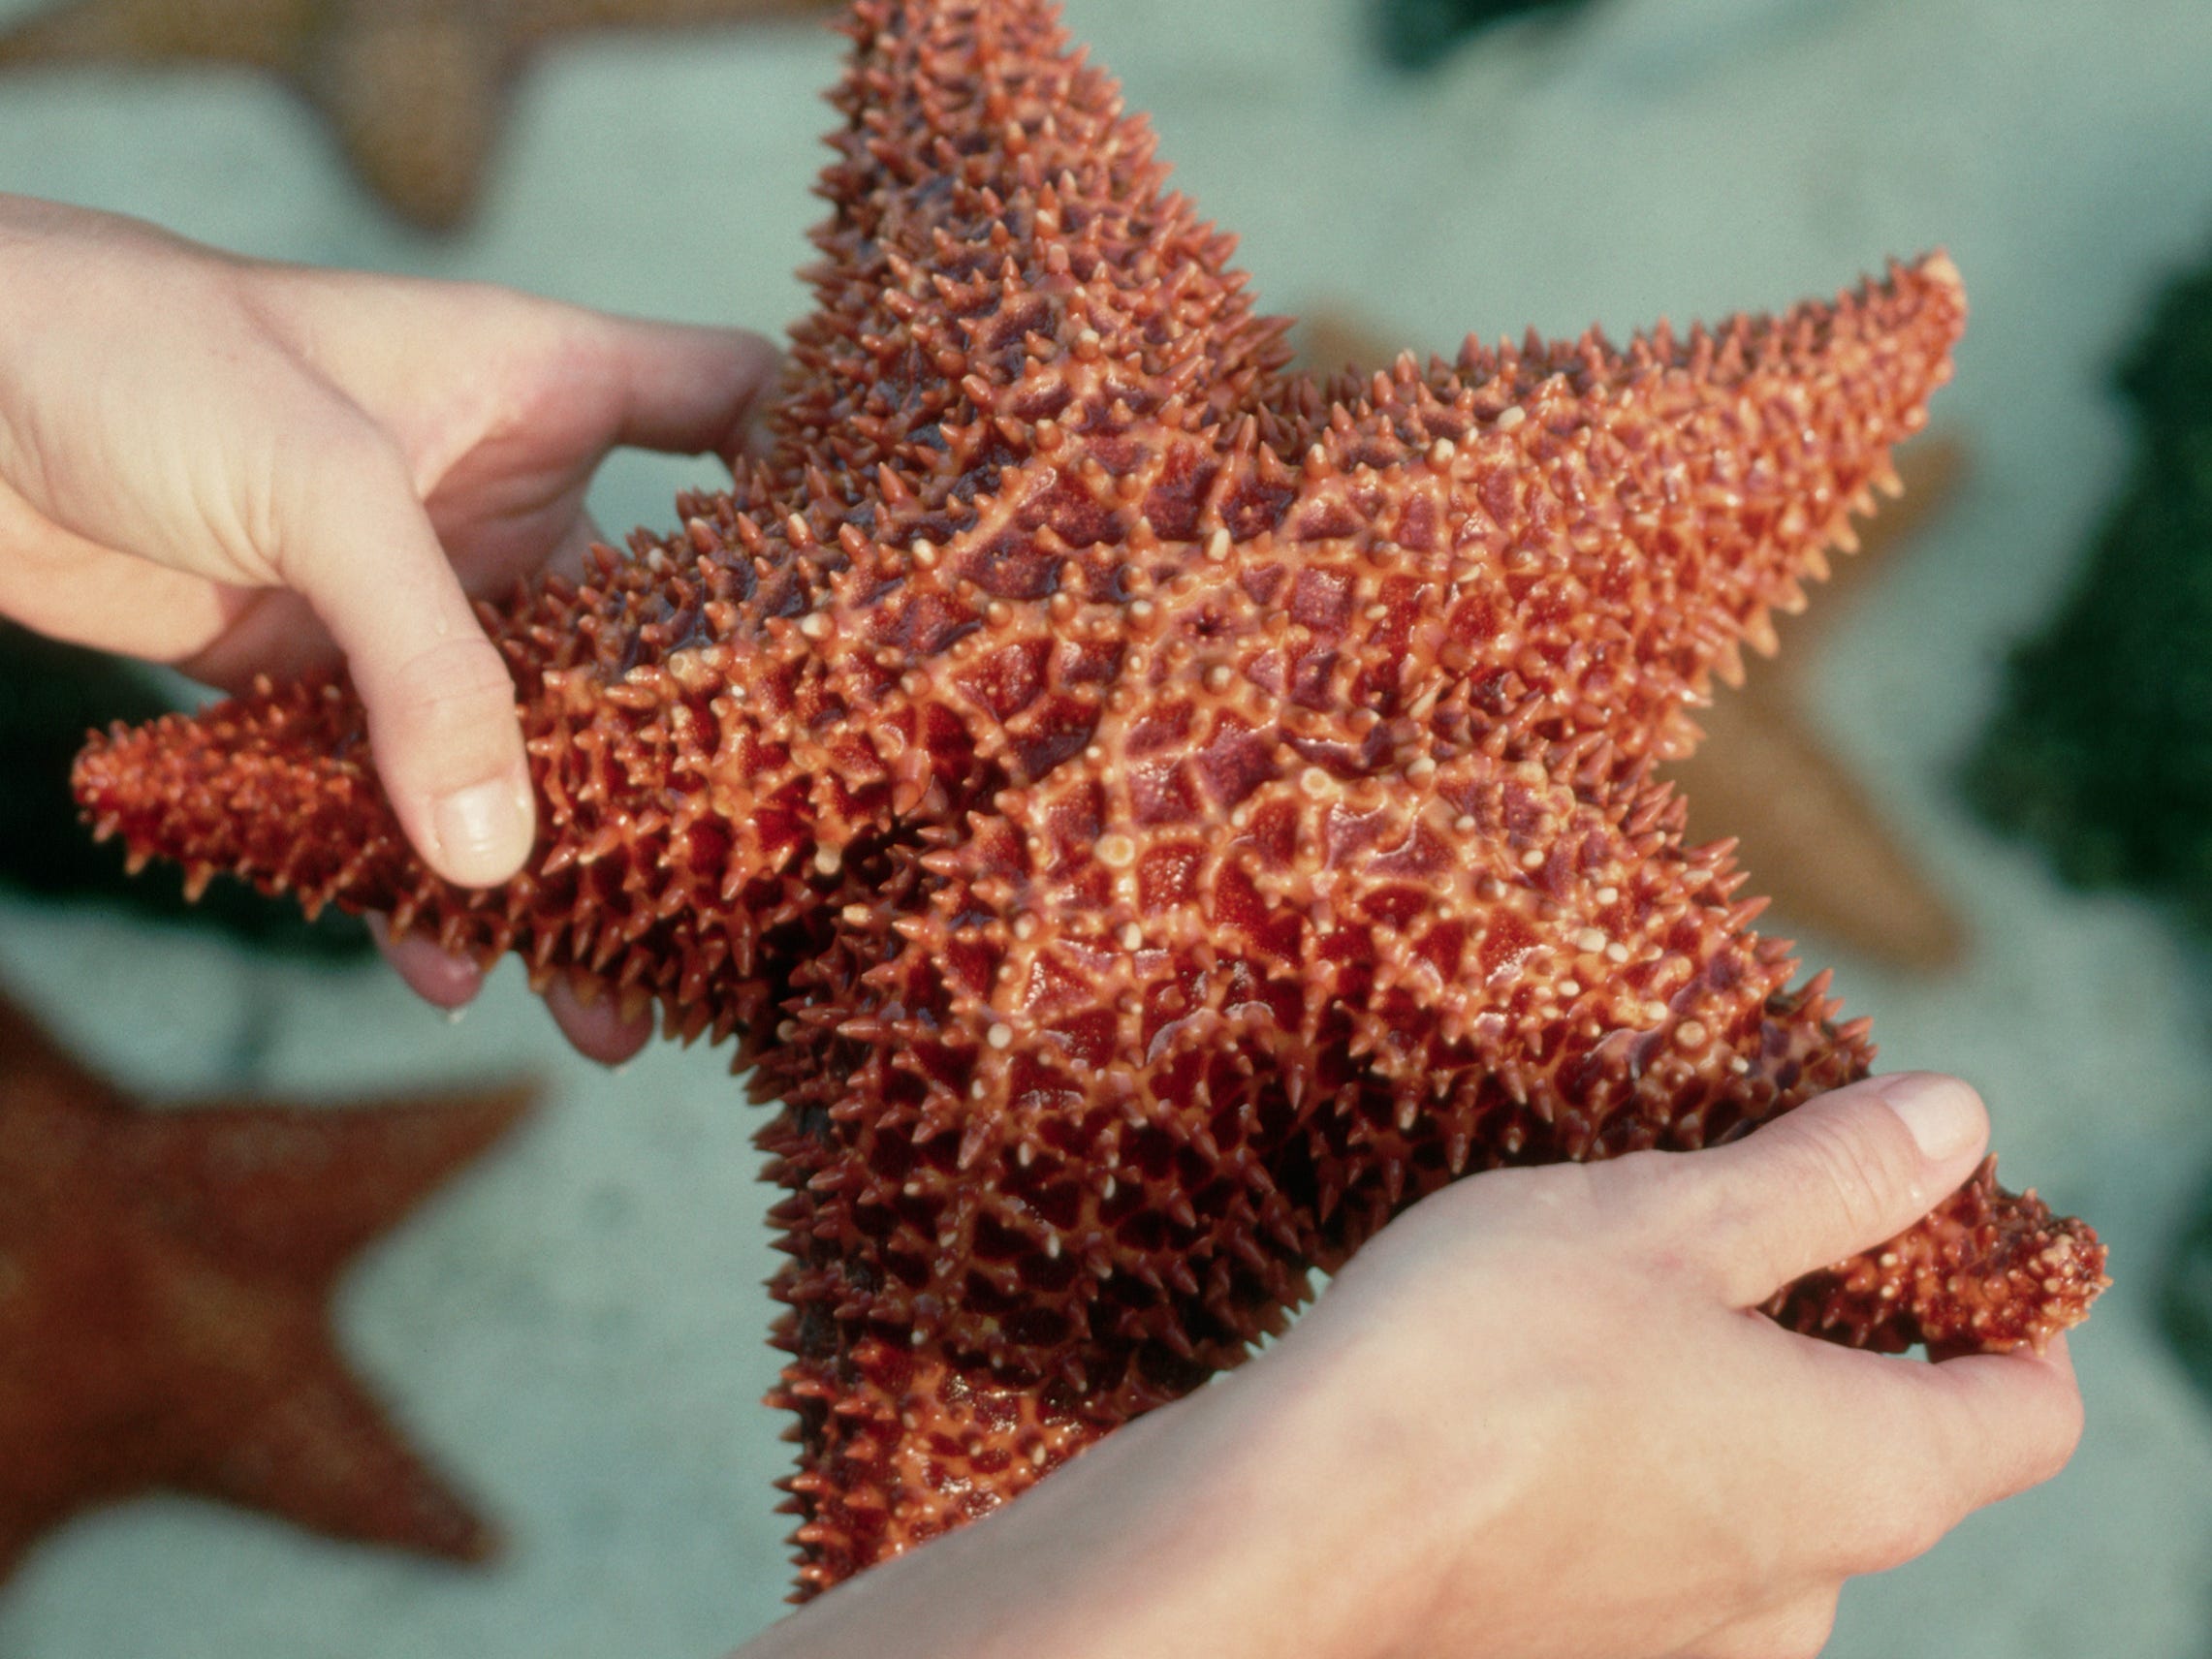 https://www.gettyimages.com/detail/photo/holding-a-starfish-at-touch-pool-in-coral-world-royalty-free-image/529593712?phrase=starfish&adppopup=true